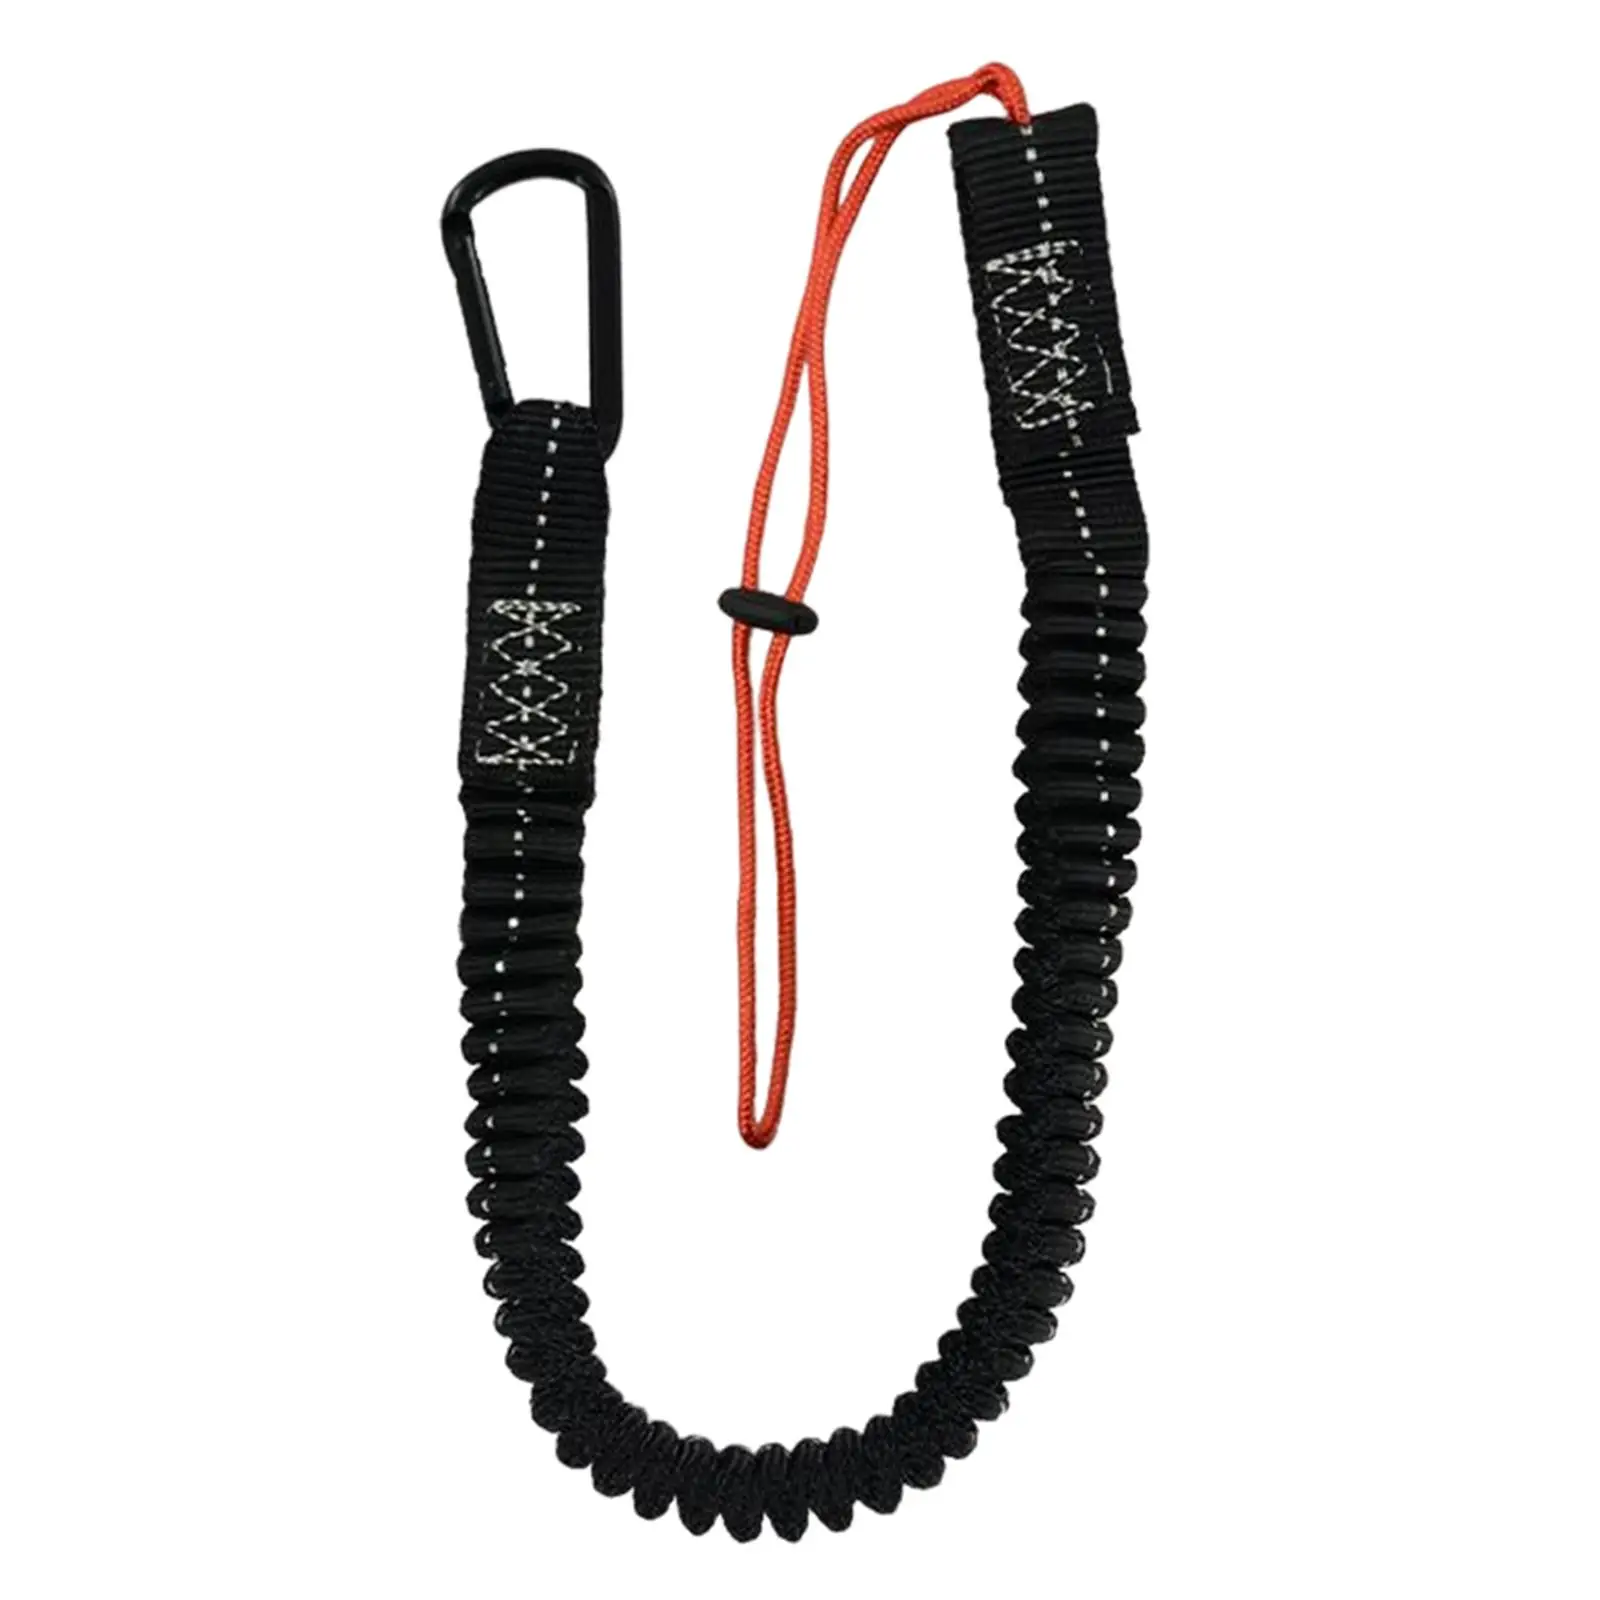  Clip Bungee Cord Adjustable Loop End Heavy Duty Fall Protection Retractable Shock Cord Stopper for Mountaineering Construction